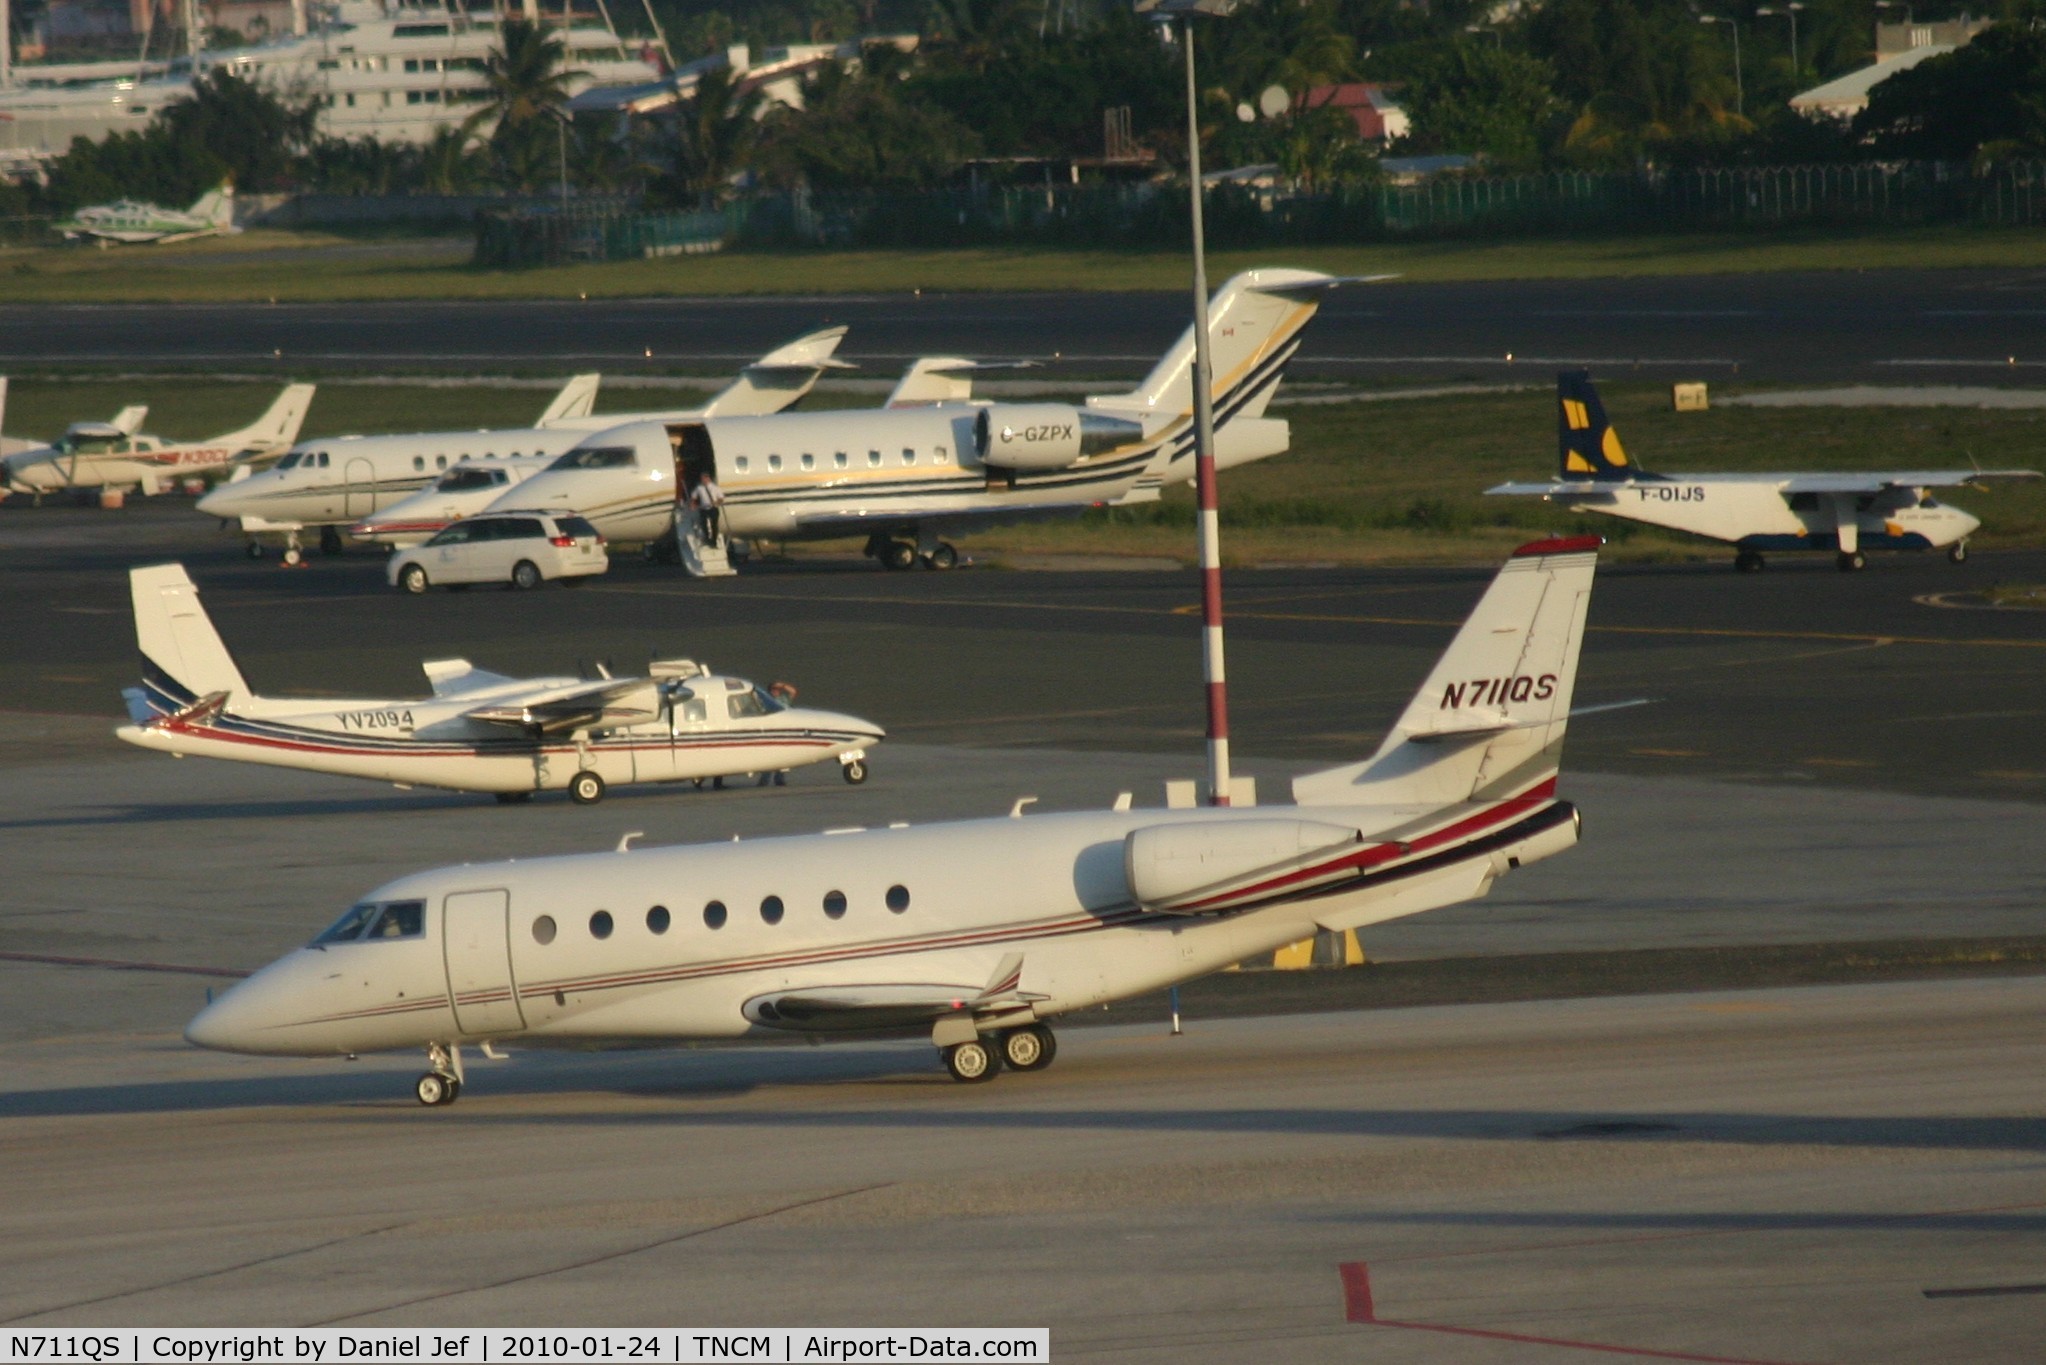 N711QS, 2006 Israel Aircraft Industries Gulfstream 200 C/N 129, N711QS taxing on the main ramp for parking